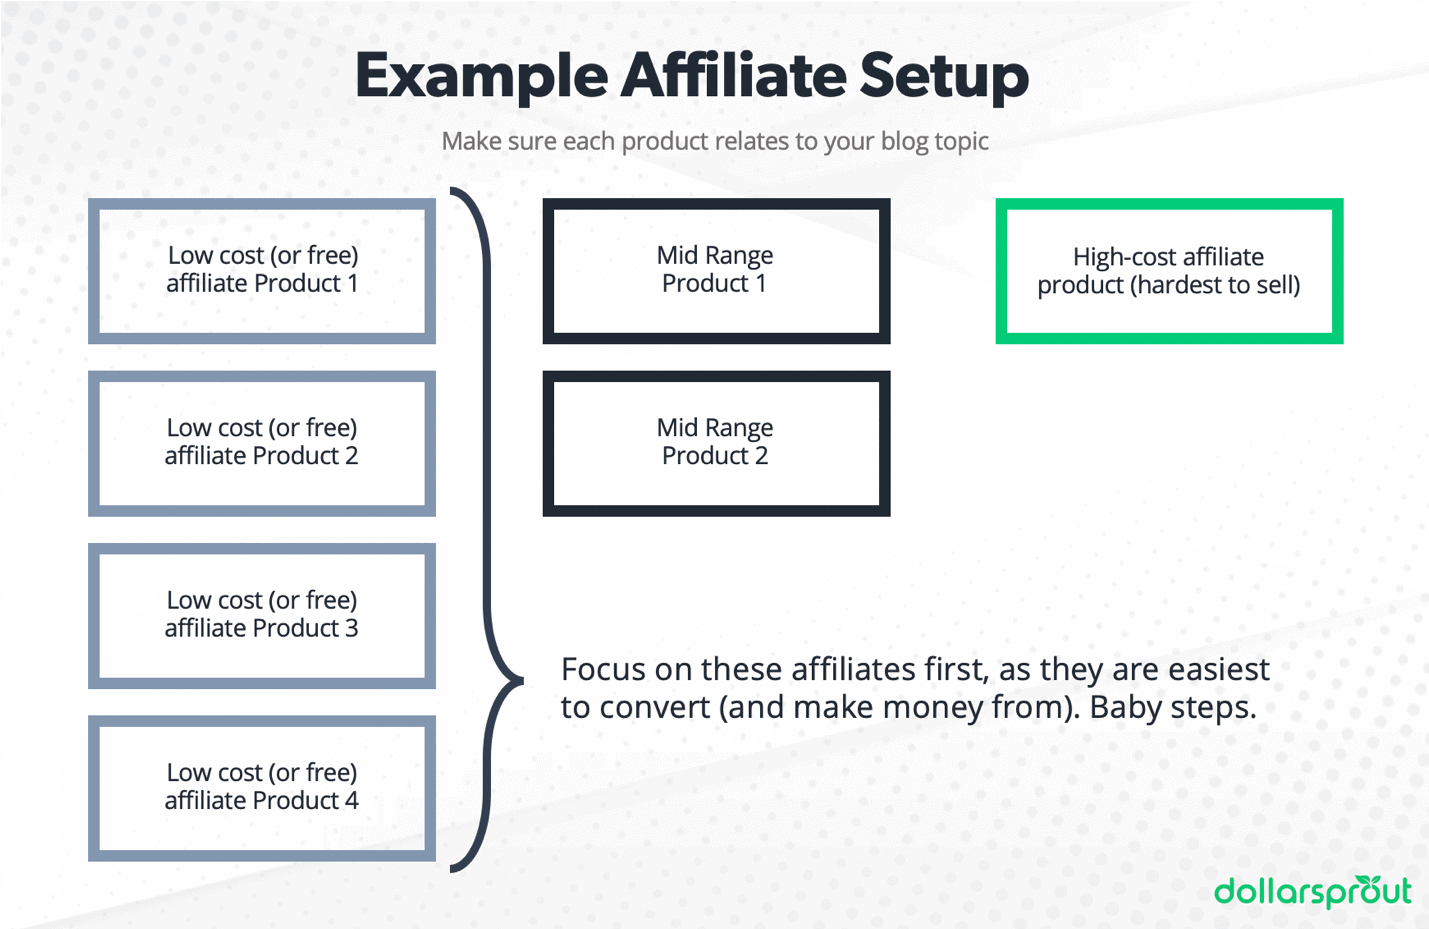 Example affiliate marketing setup for new bloggers that want to make money from their blog